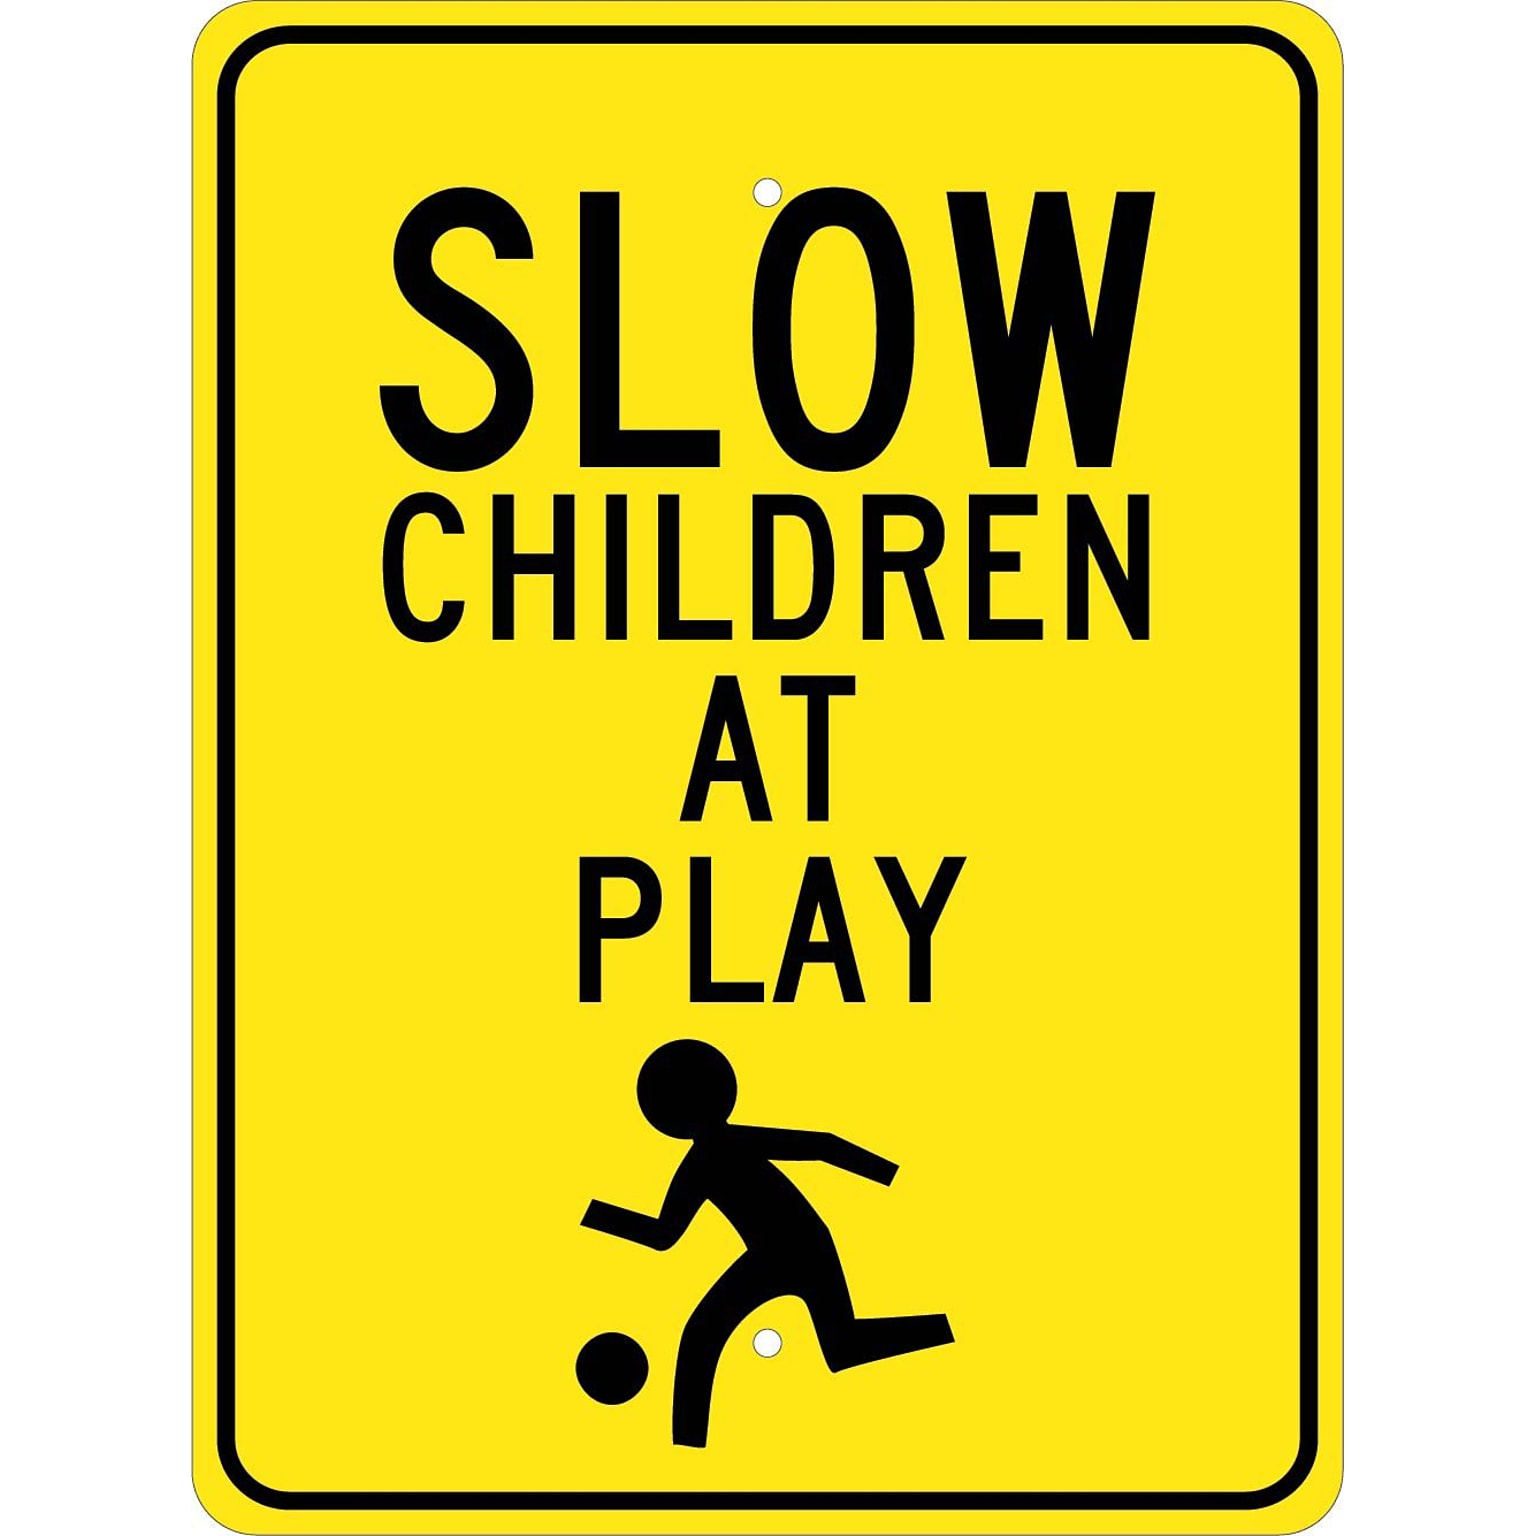 National Marker Reflective Slow Children At Play Warning Traffic Control Sign, 24 x 18, Aluminum (TM164J)